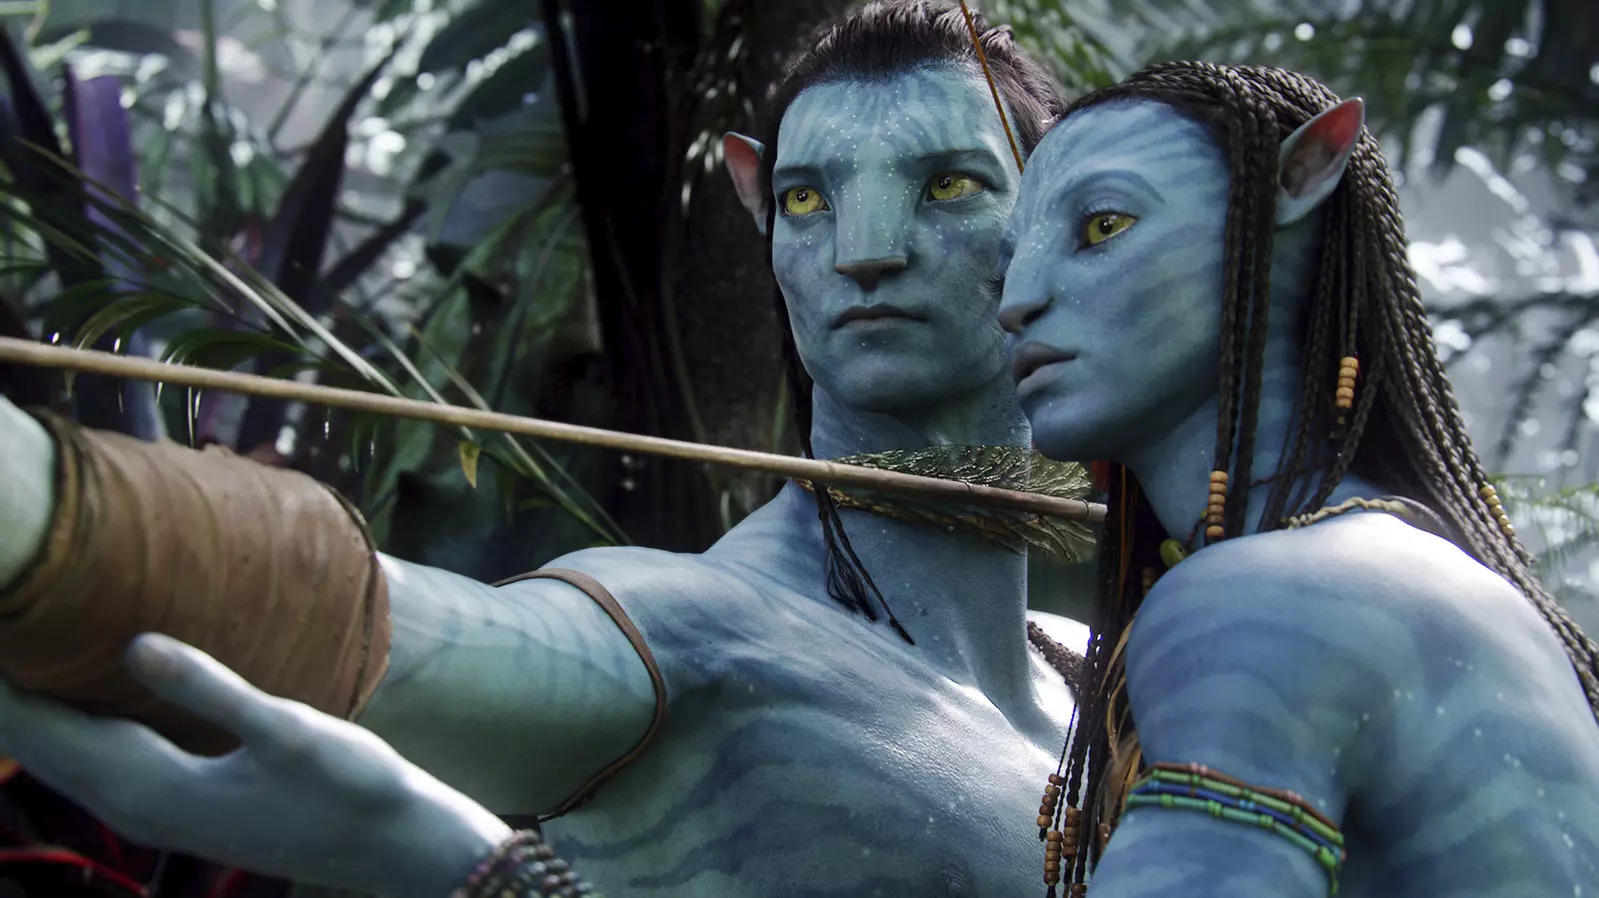 Avatar 2 Full Movie Download in Hindi: James Cameron's visual spectacle  leaked online in HD on Filmyzilaa, Telegram, Movierulz